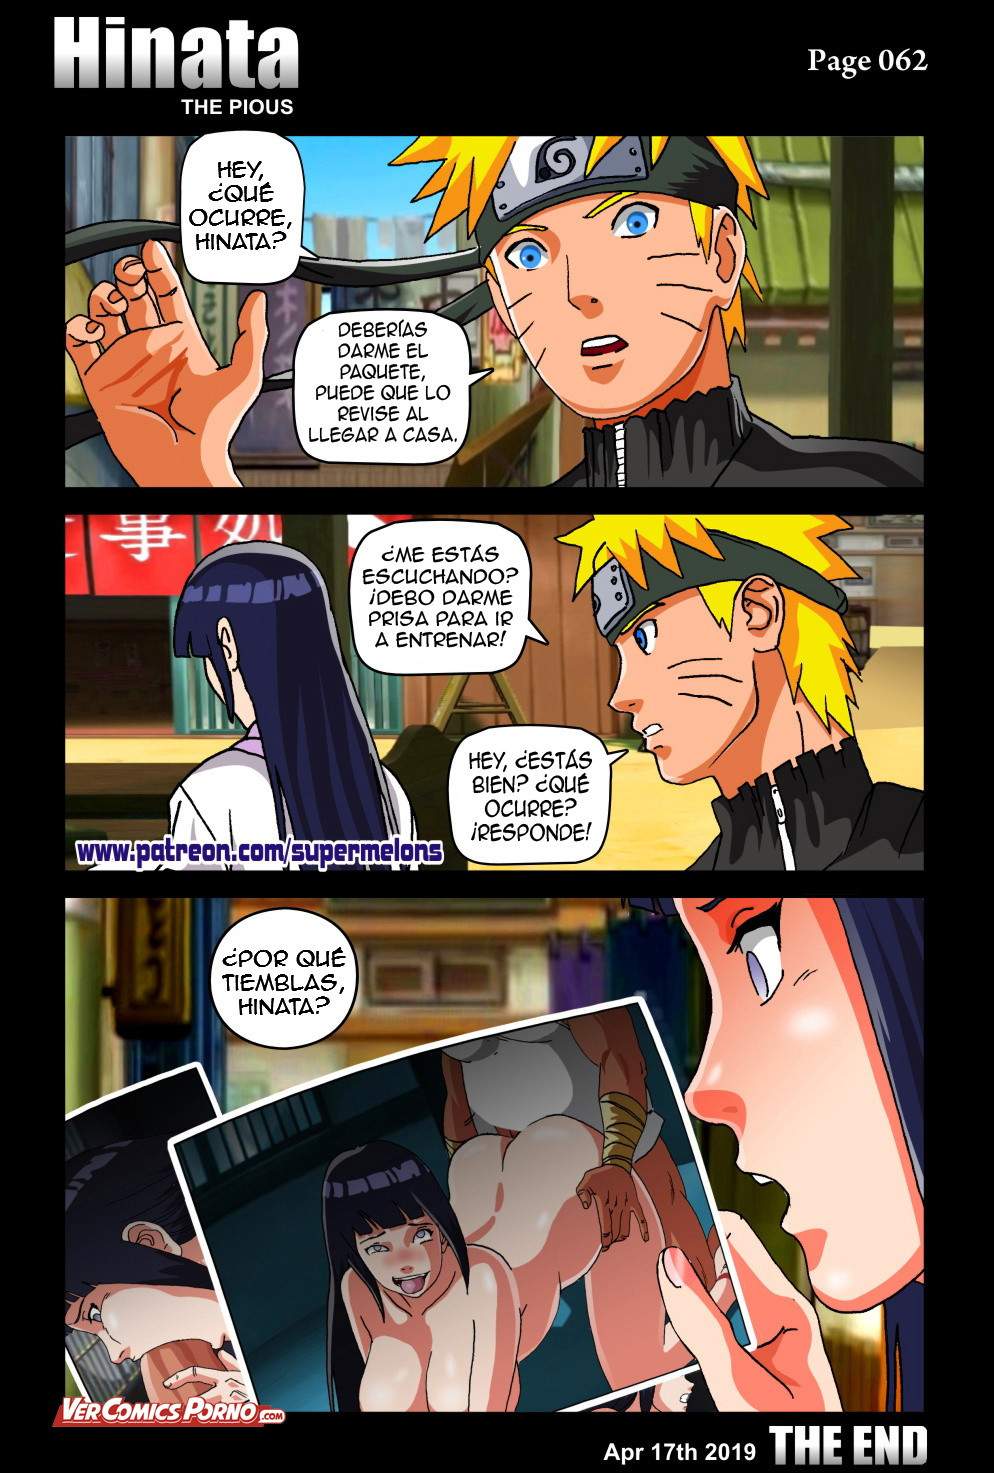 Hinata the pious image number 65